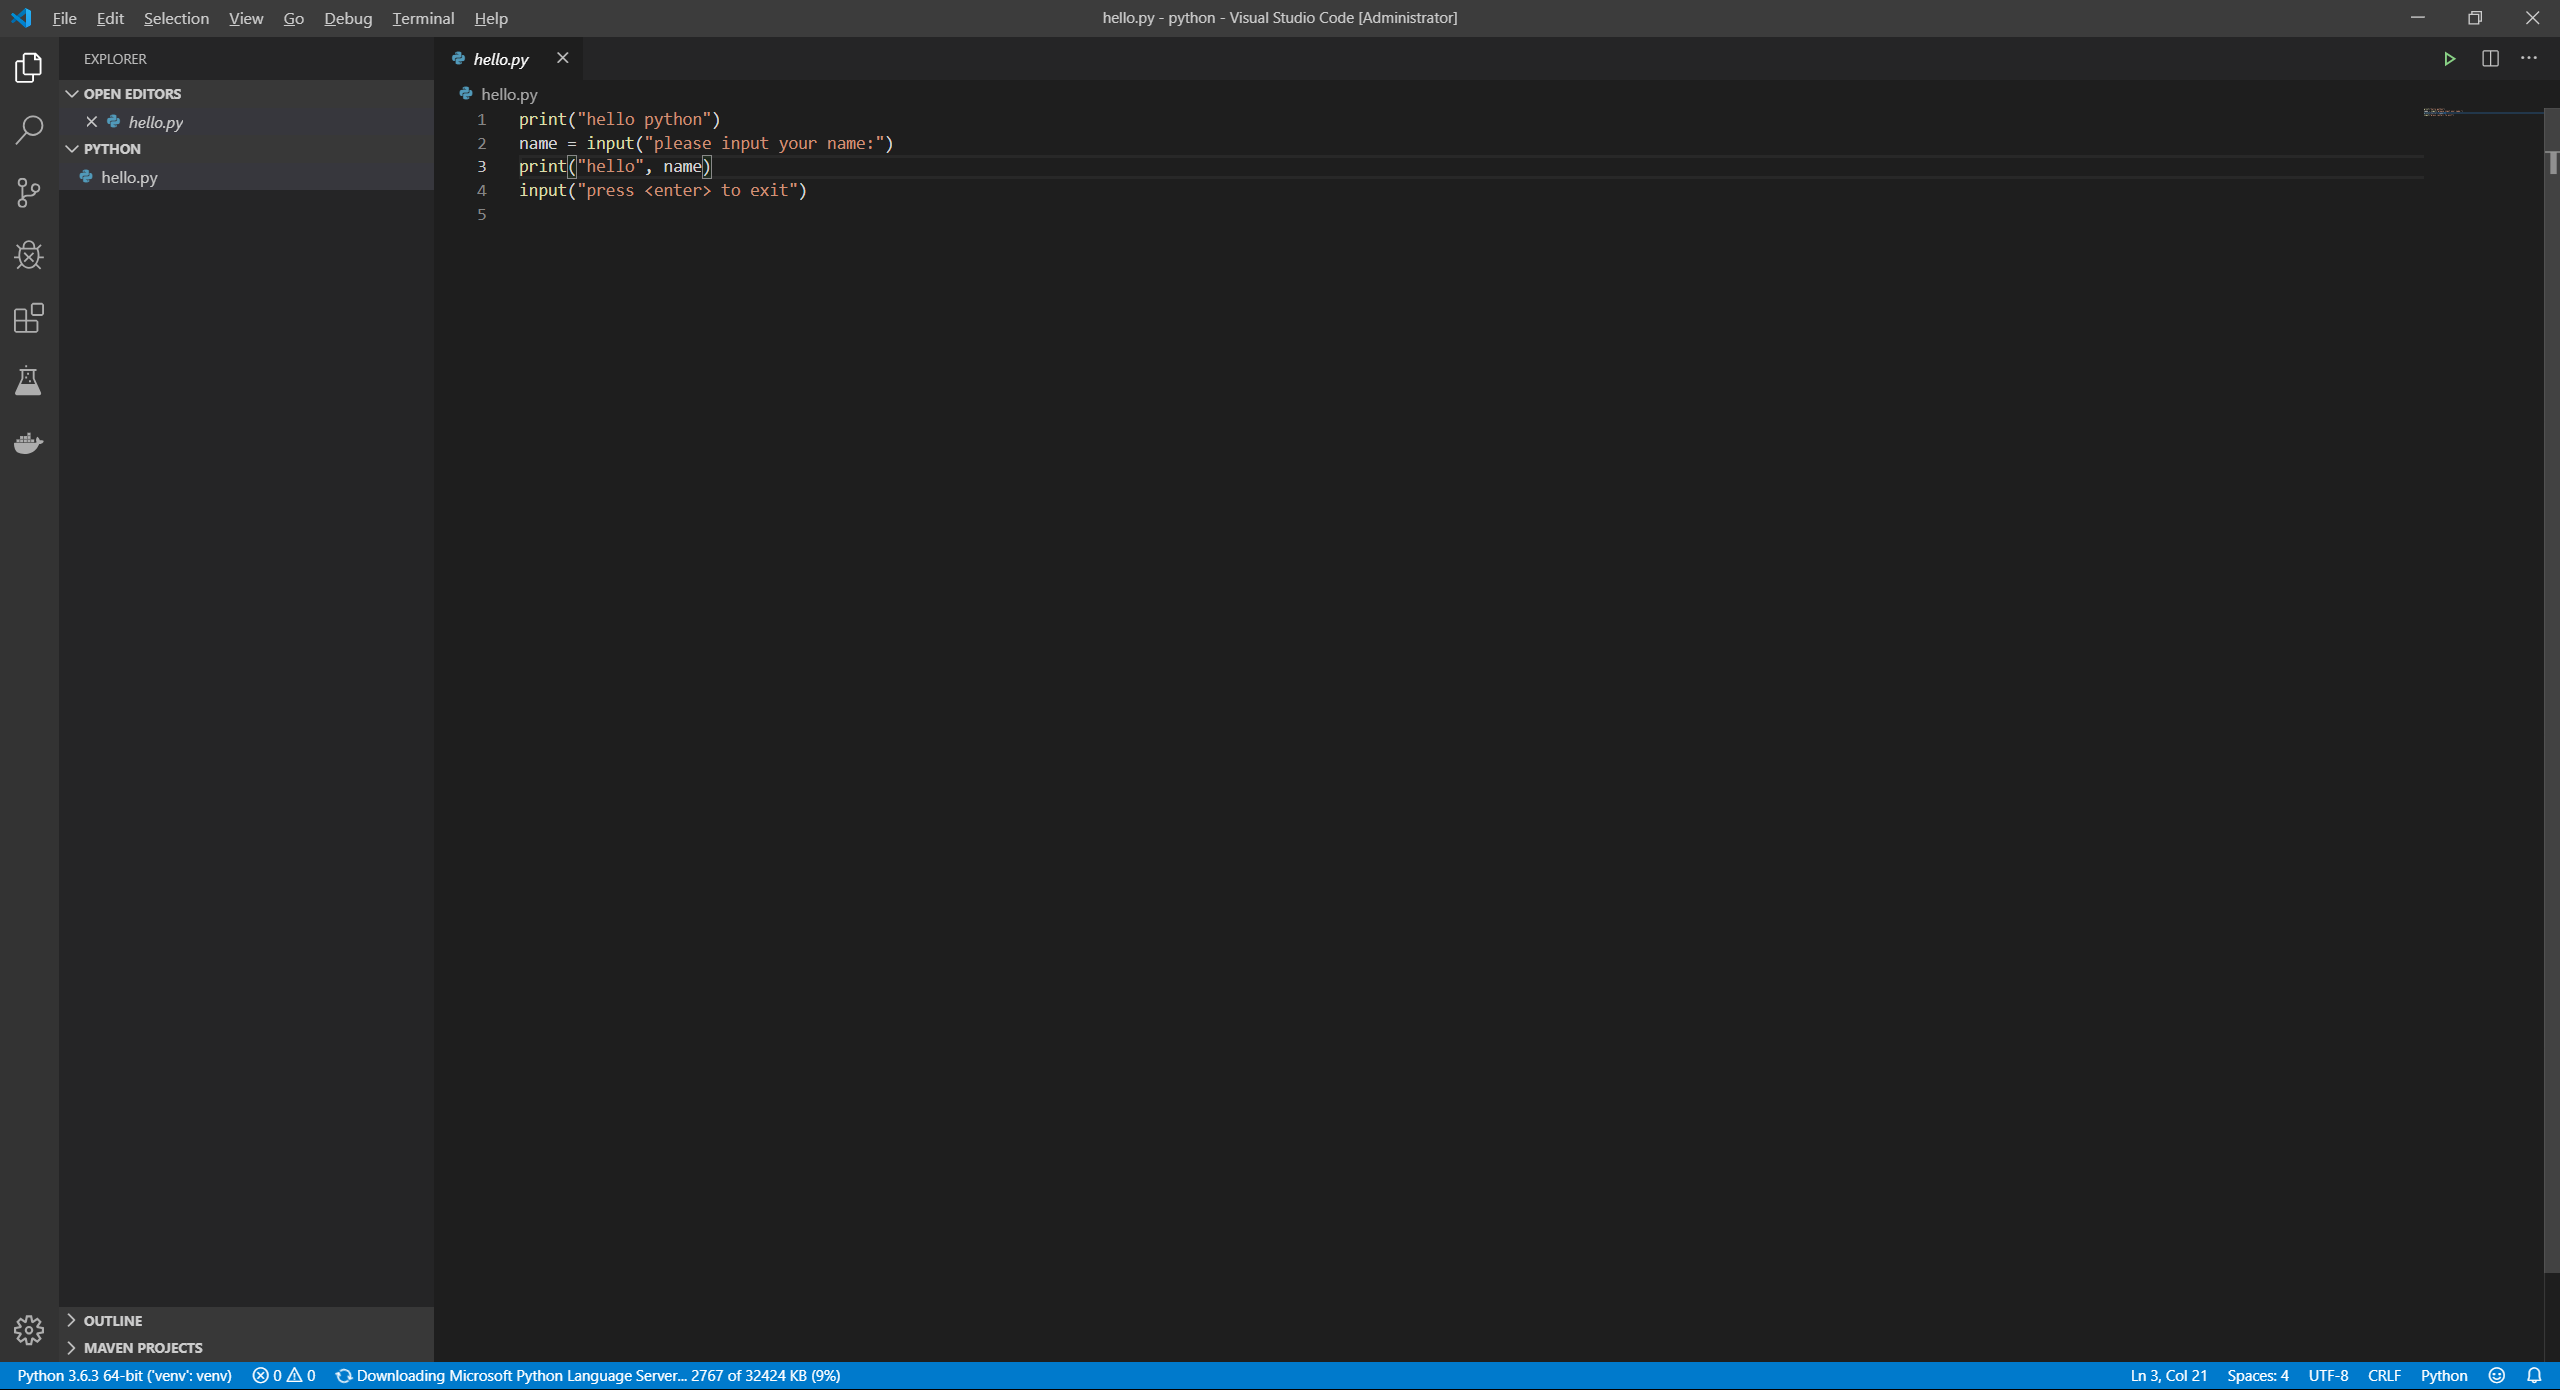 vscode.png